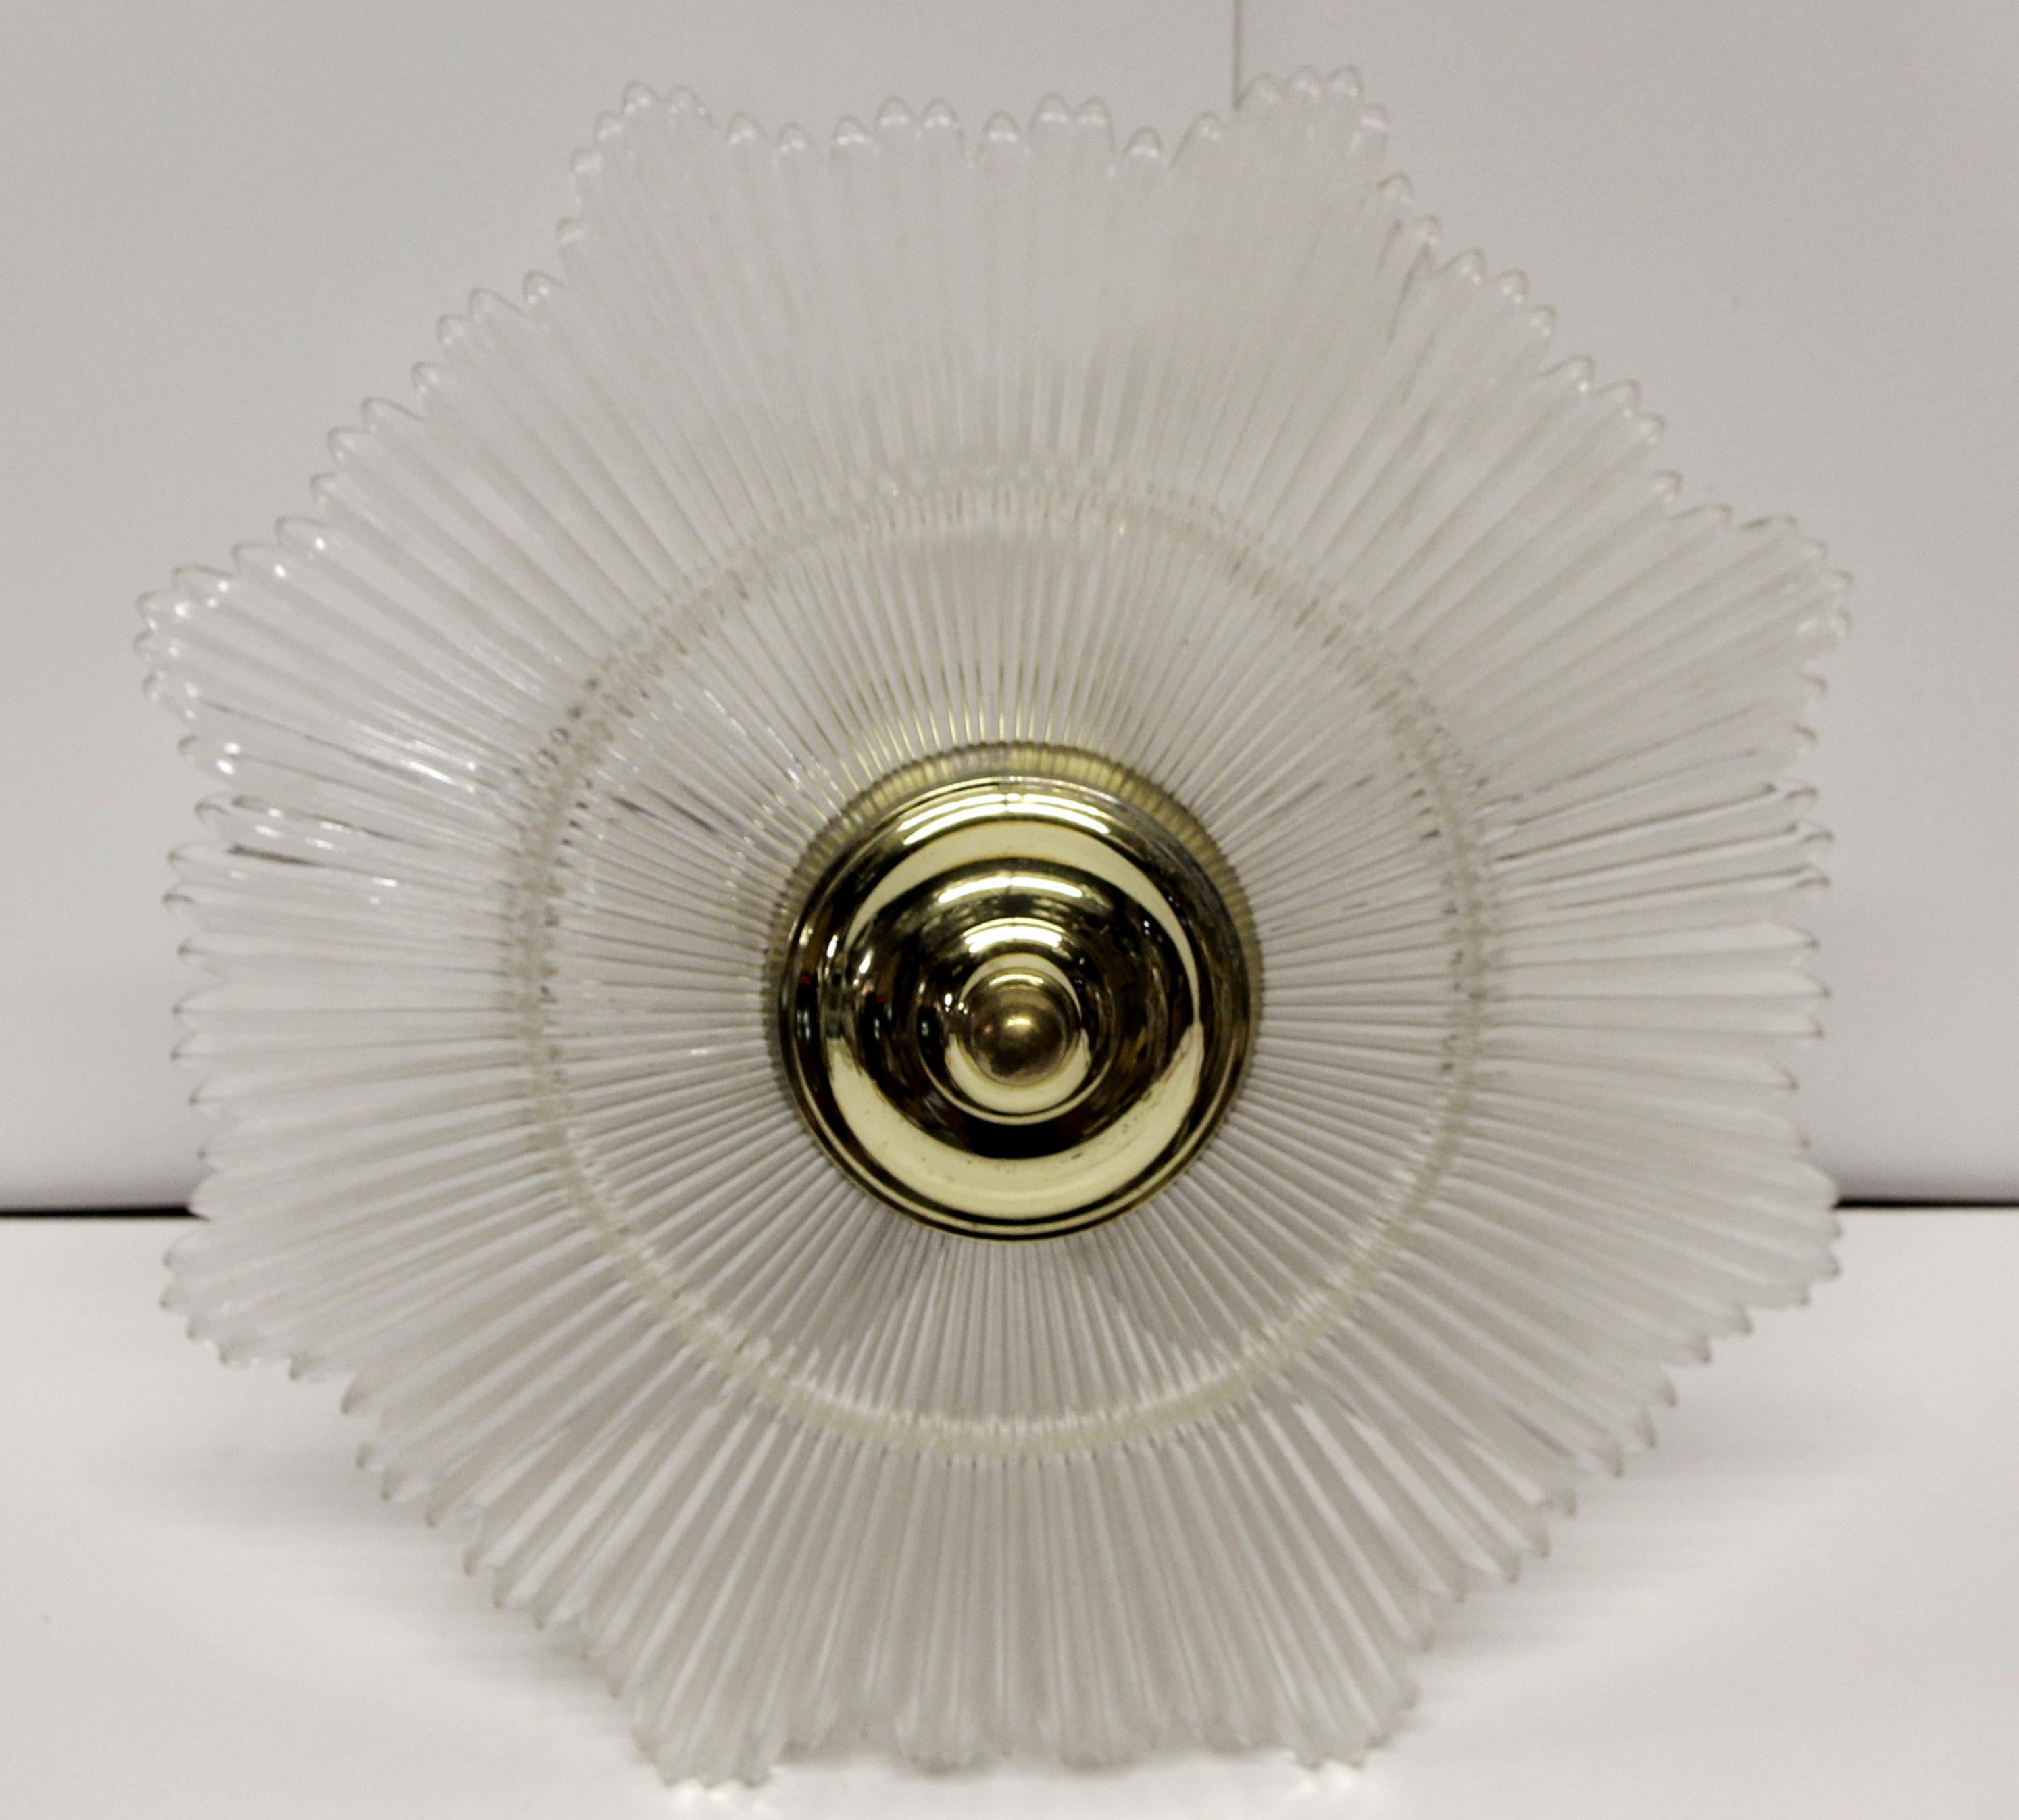 1960s Art Deco style three socket clear star burst crystal pendant light with a brass frame. This can be seen at our 400 Gilligan St location in Scranton, PA.